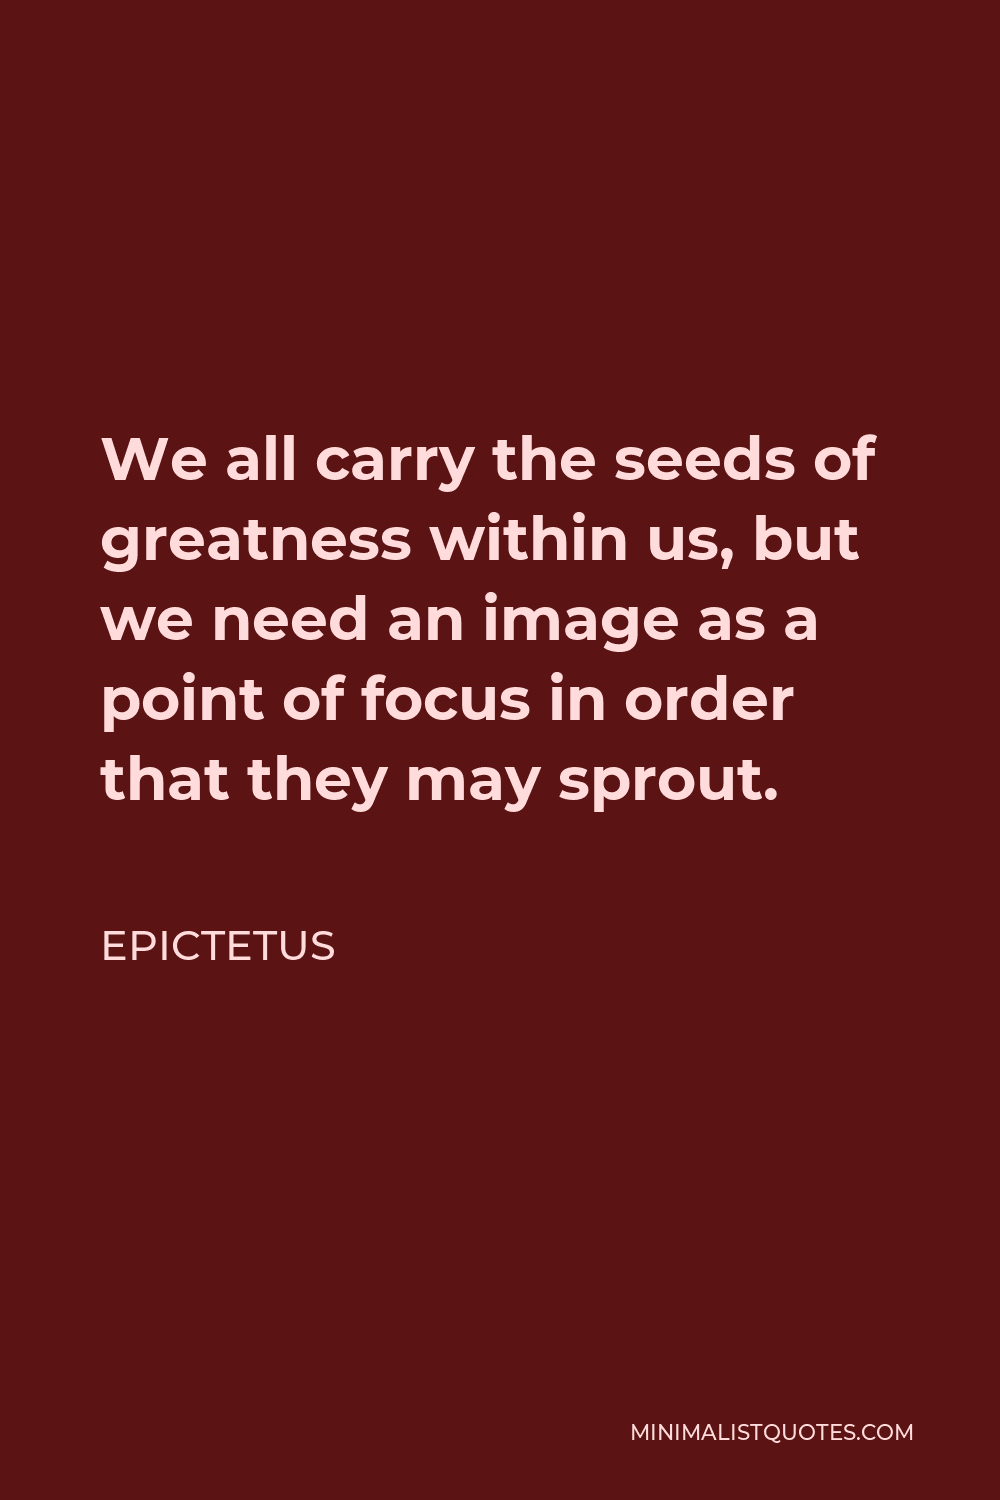 Epictetus Quote - We all carry the seeds of greatness within us, but we need an image as a point of focus in order that they may sprout.